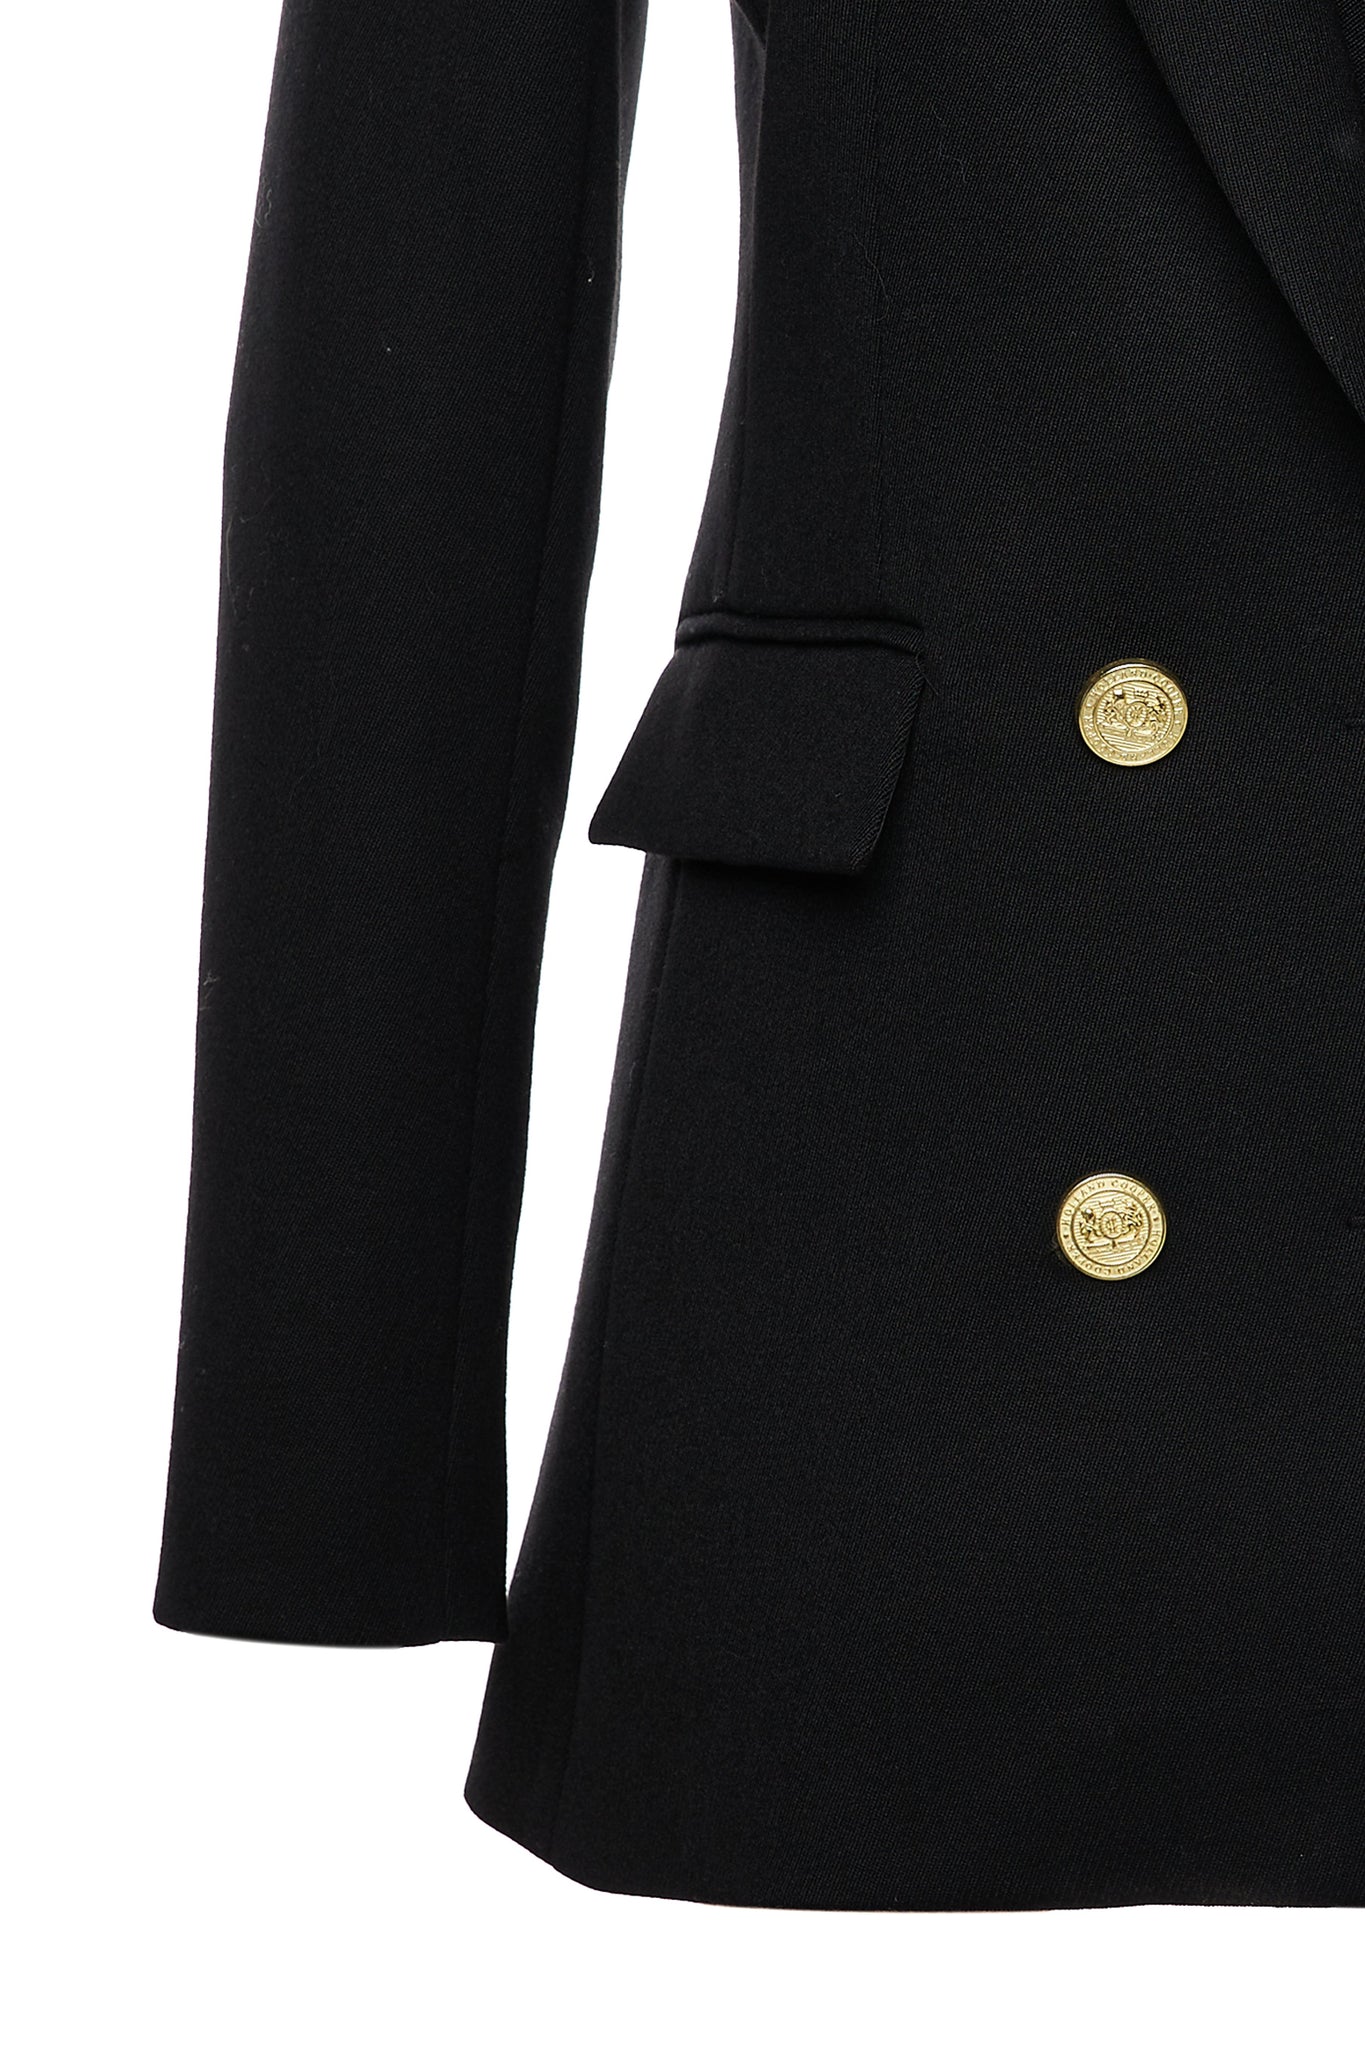 pocket and gold button detail on double breasted linen blazer in black with two hip pockets and gold button details down front and on cuffs and handmade in the uk